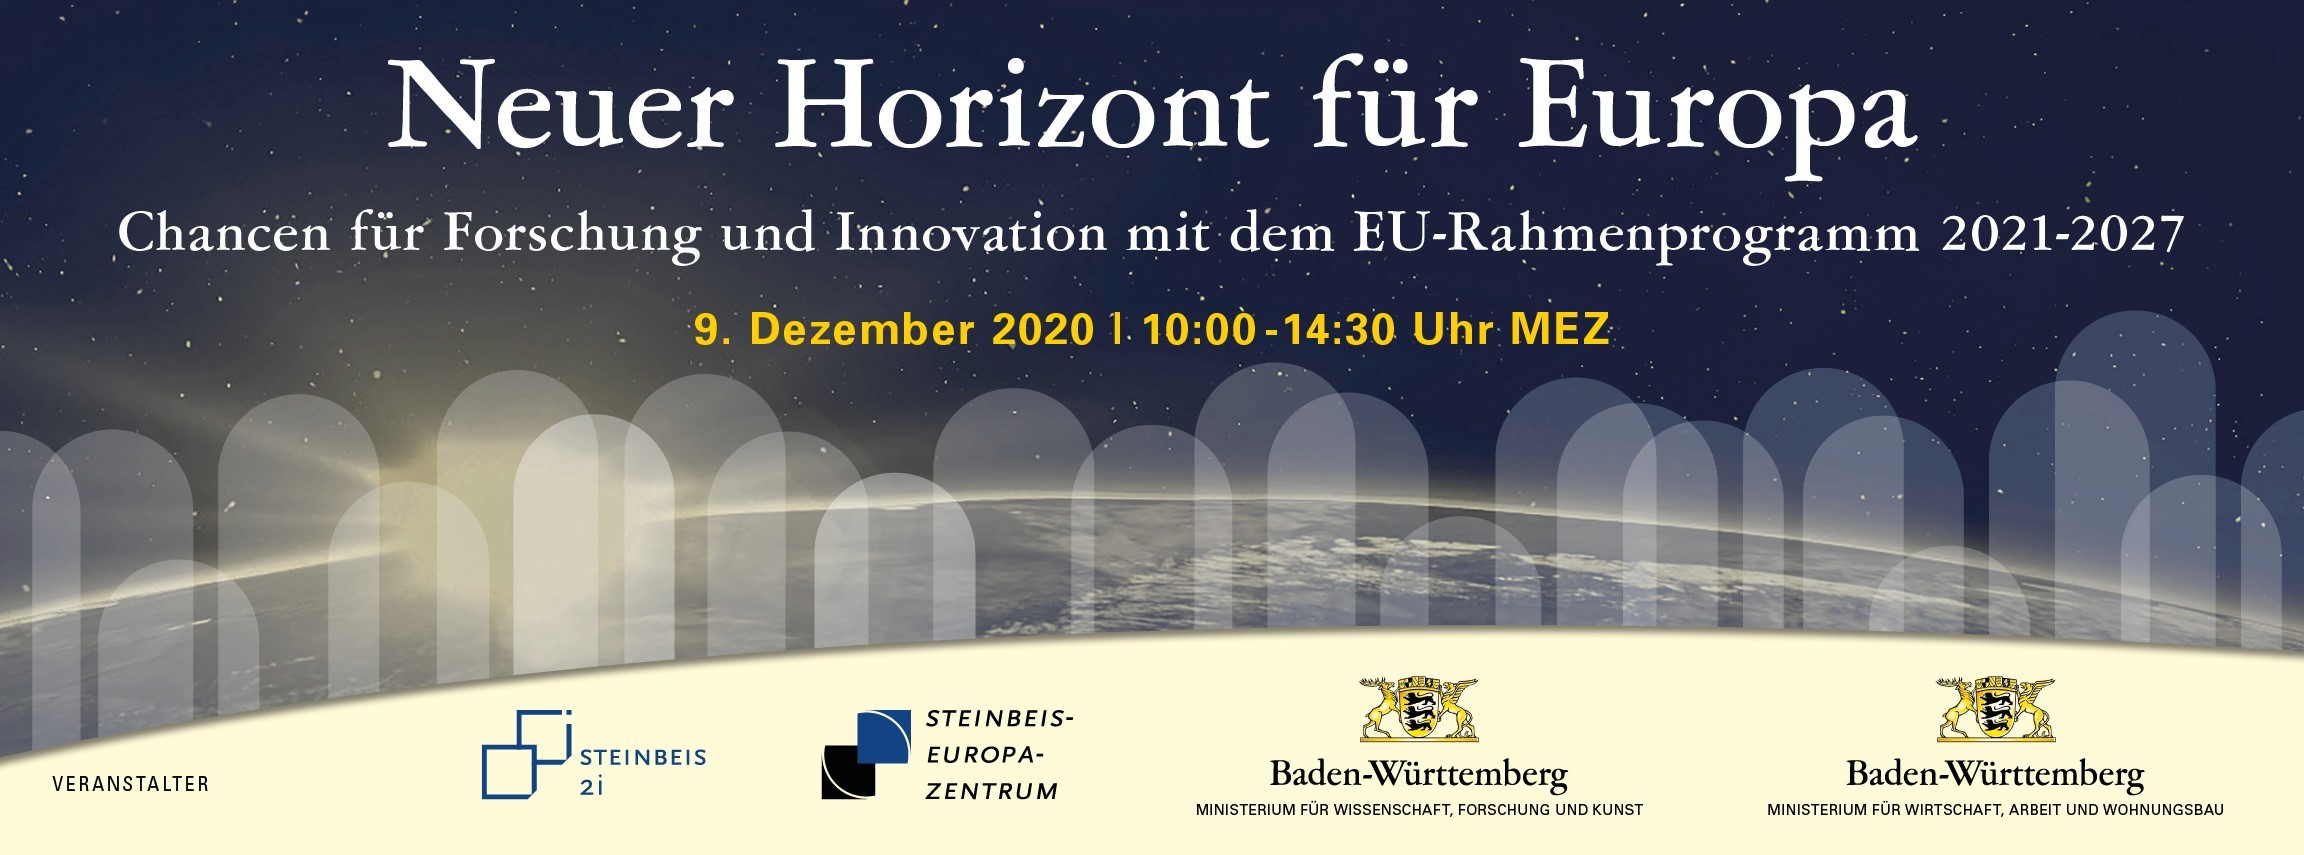 Event note: New horizon for Europe - Opportunities for research and innovation 